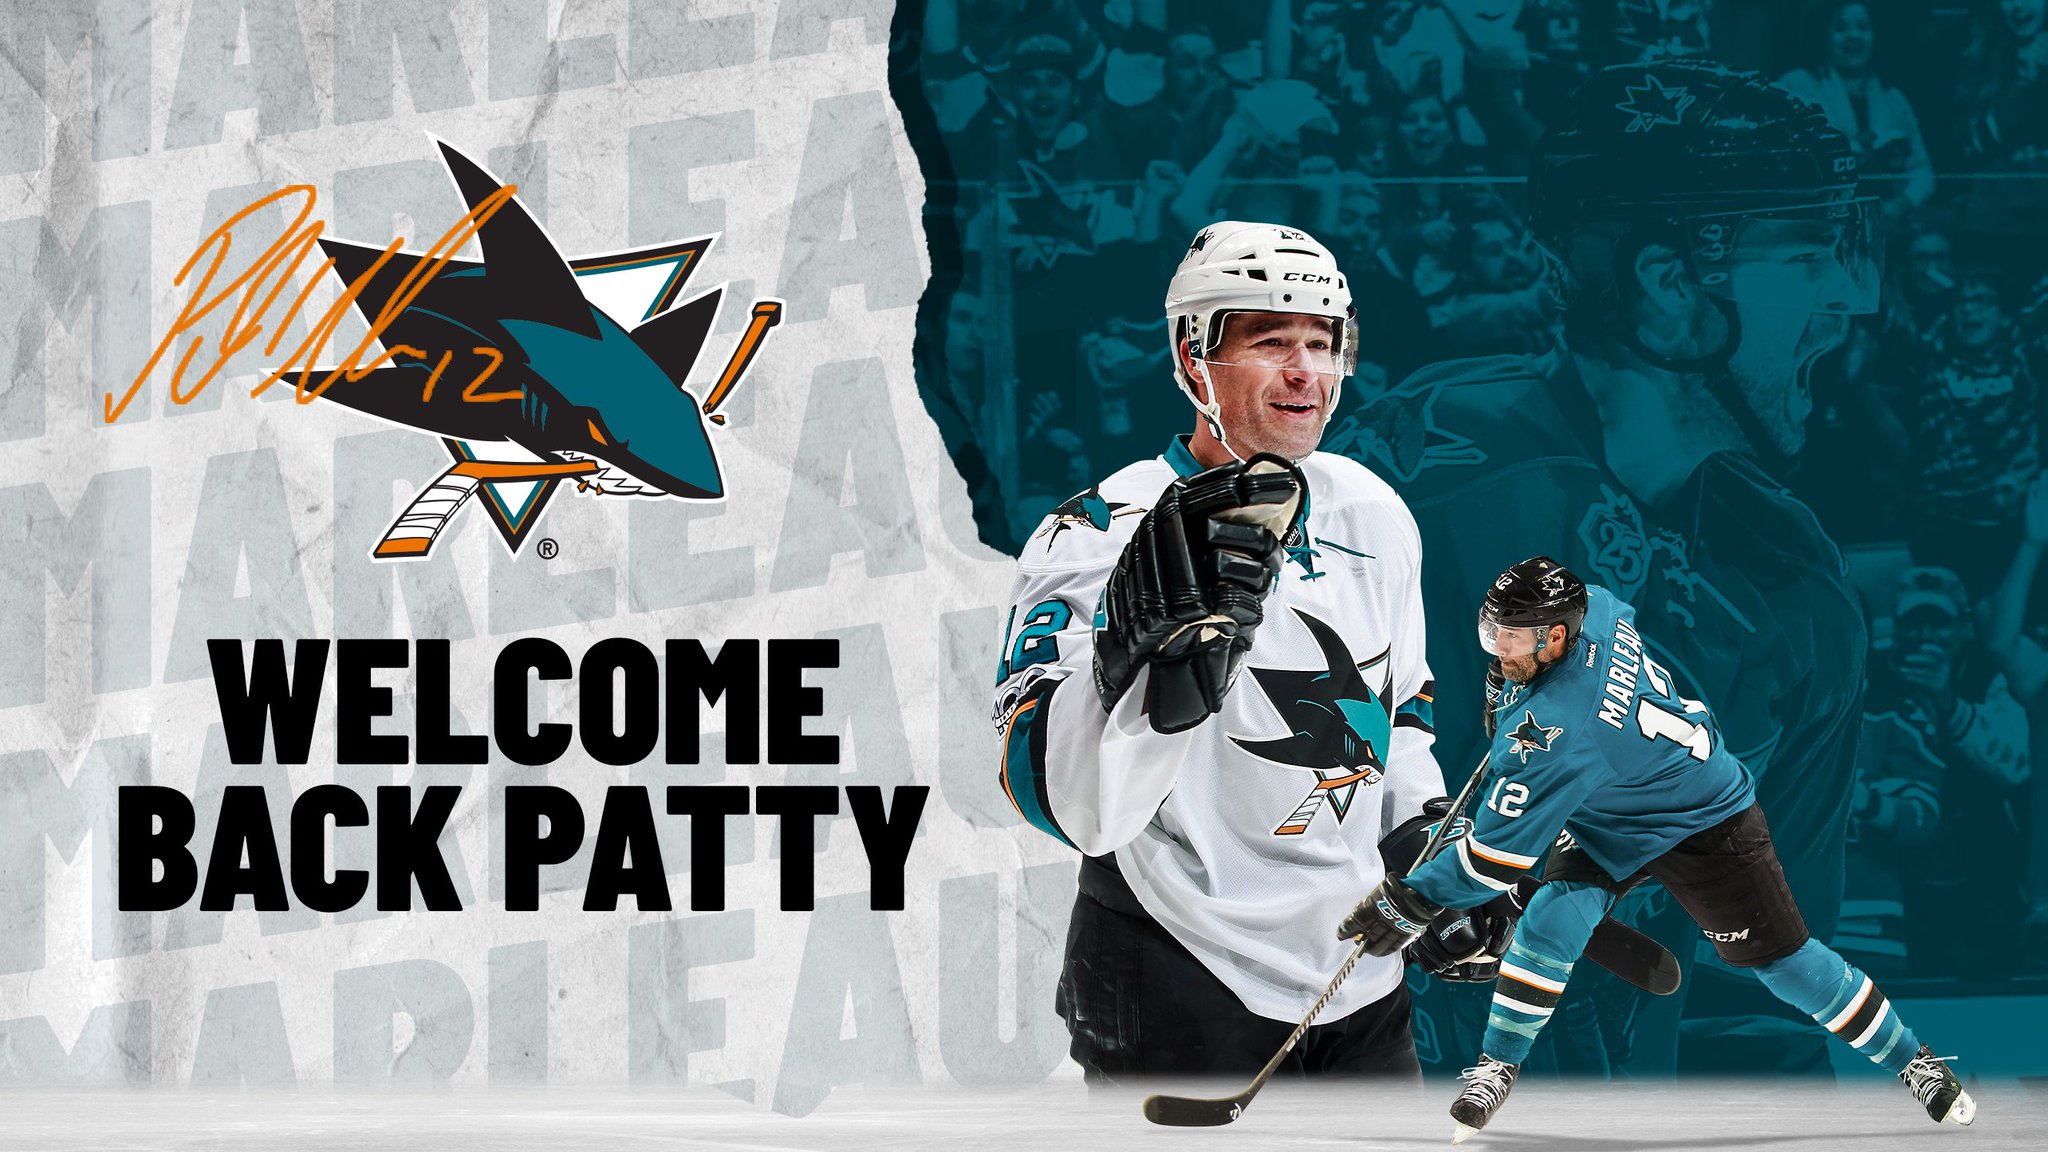 BREAKING! Patrick Marleau Is Returning To The San Jose Sharks - Teal Town  USA